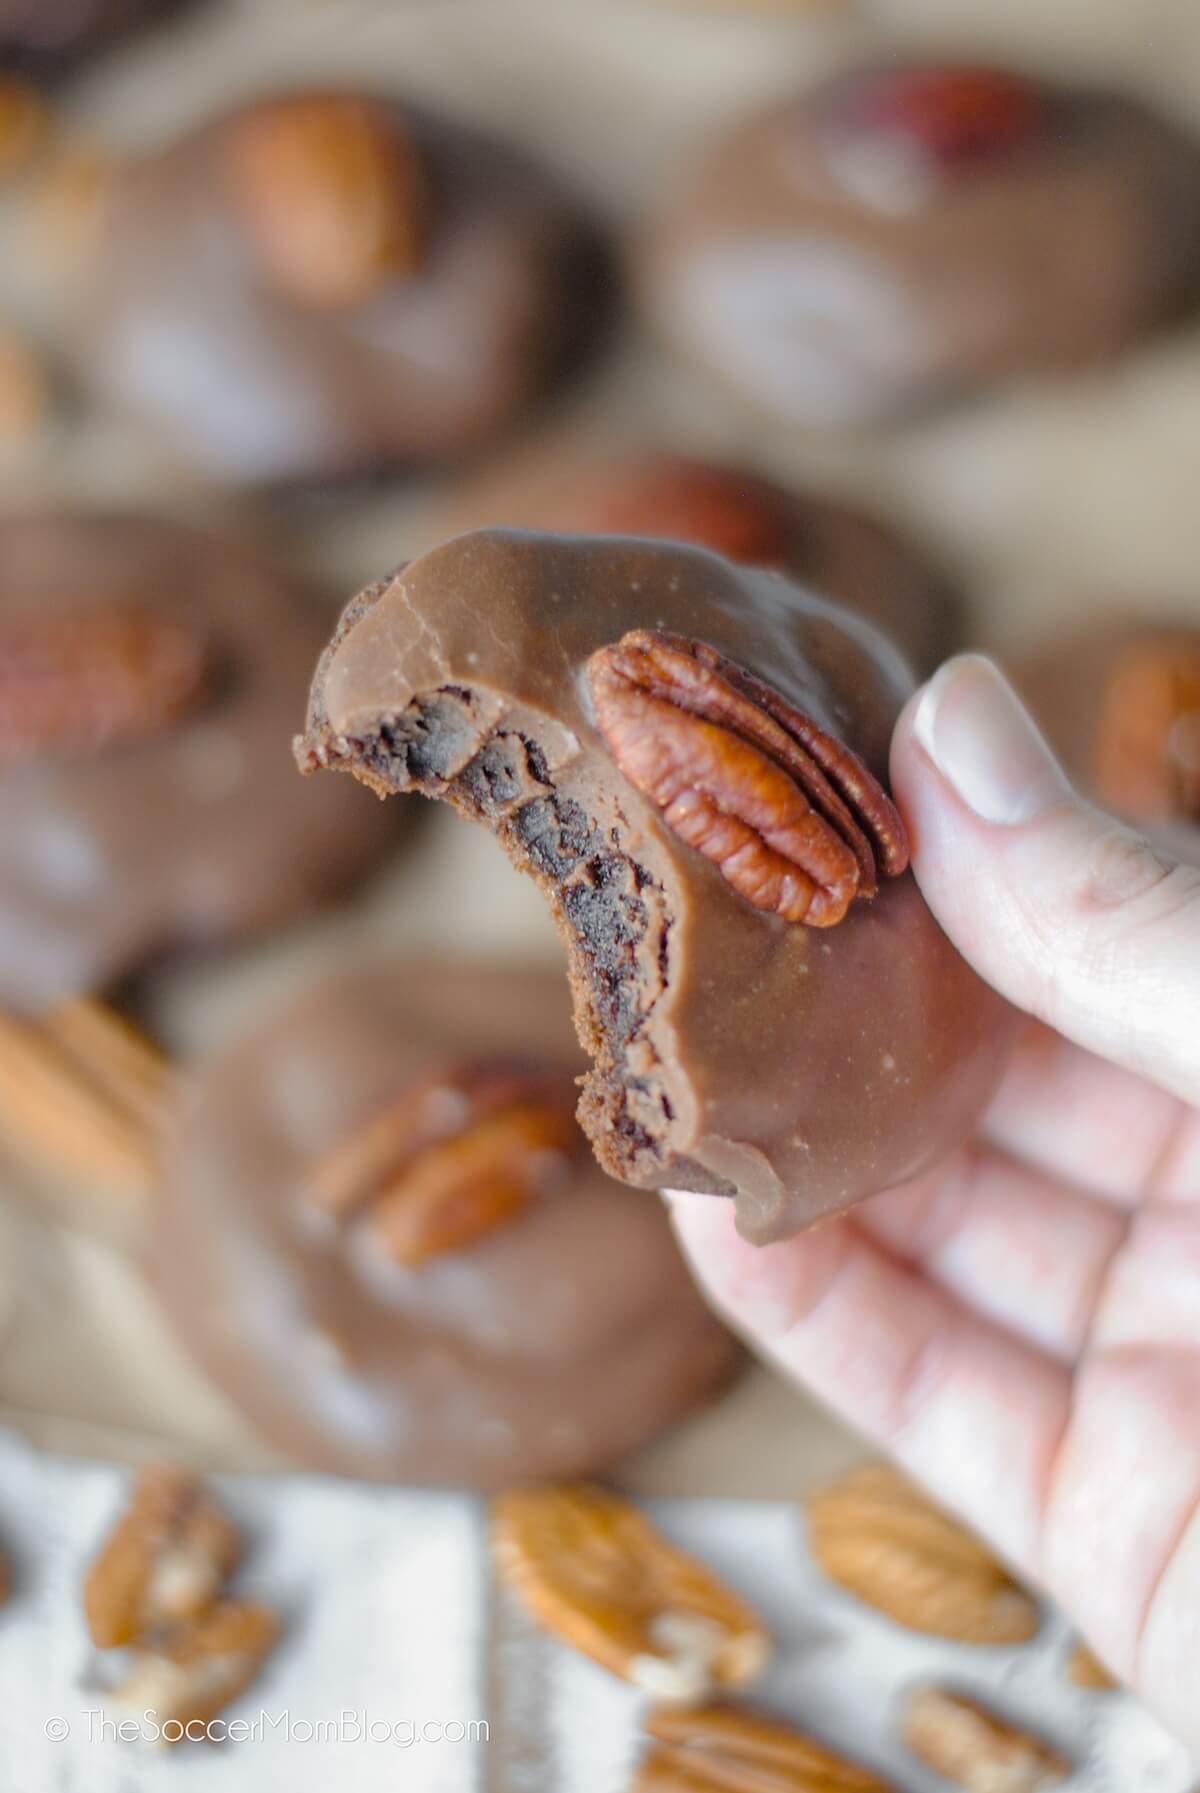 hand holding a chocolate cookie with fudge icing and a pecan half, with a bite taken.